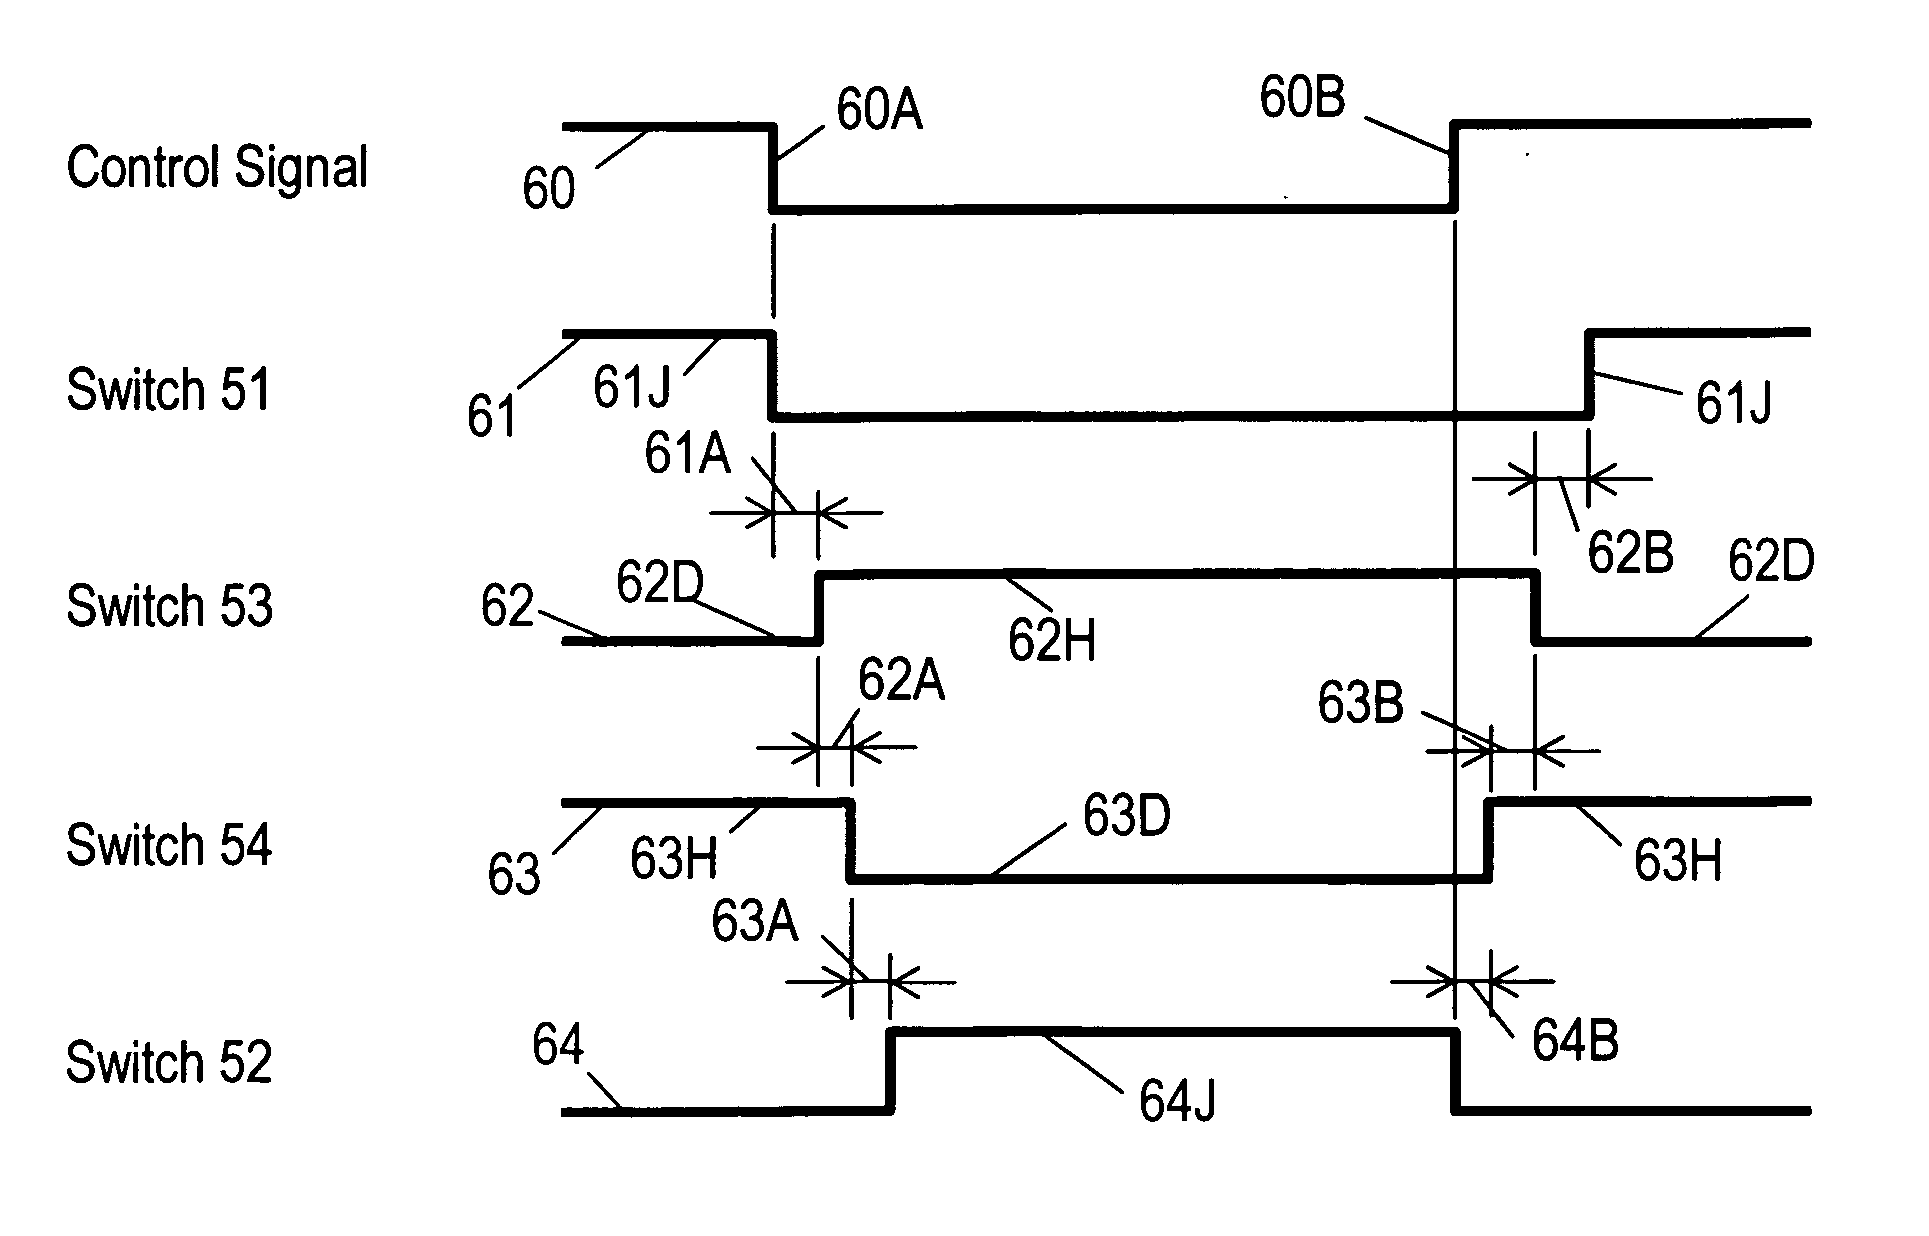 Power supply apparatus, method of controlling the apparatus, and electronic device using the apparatus